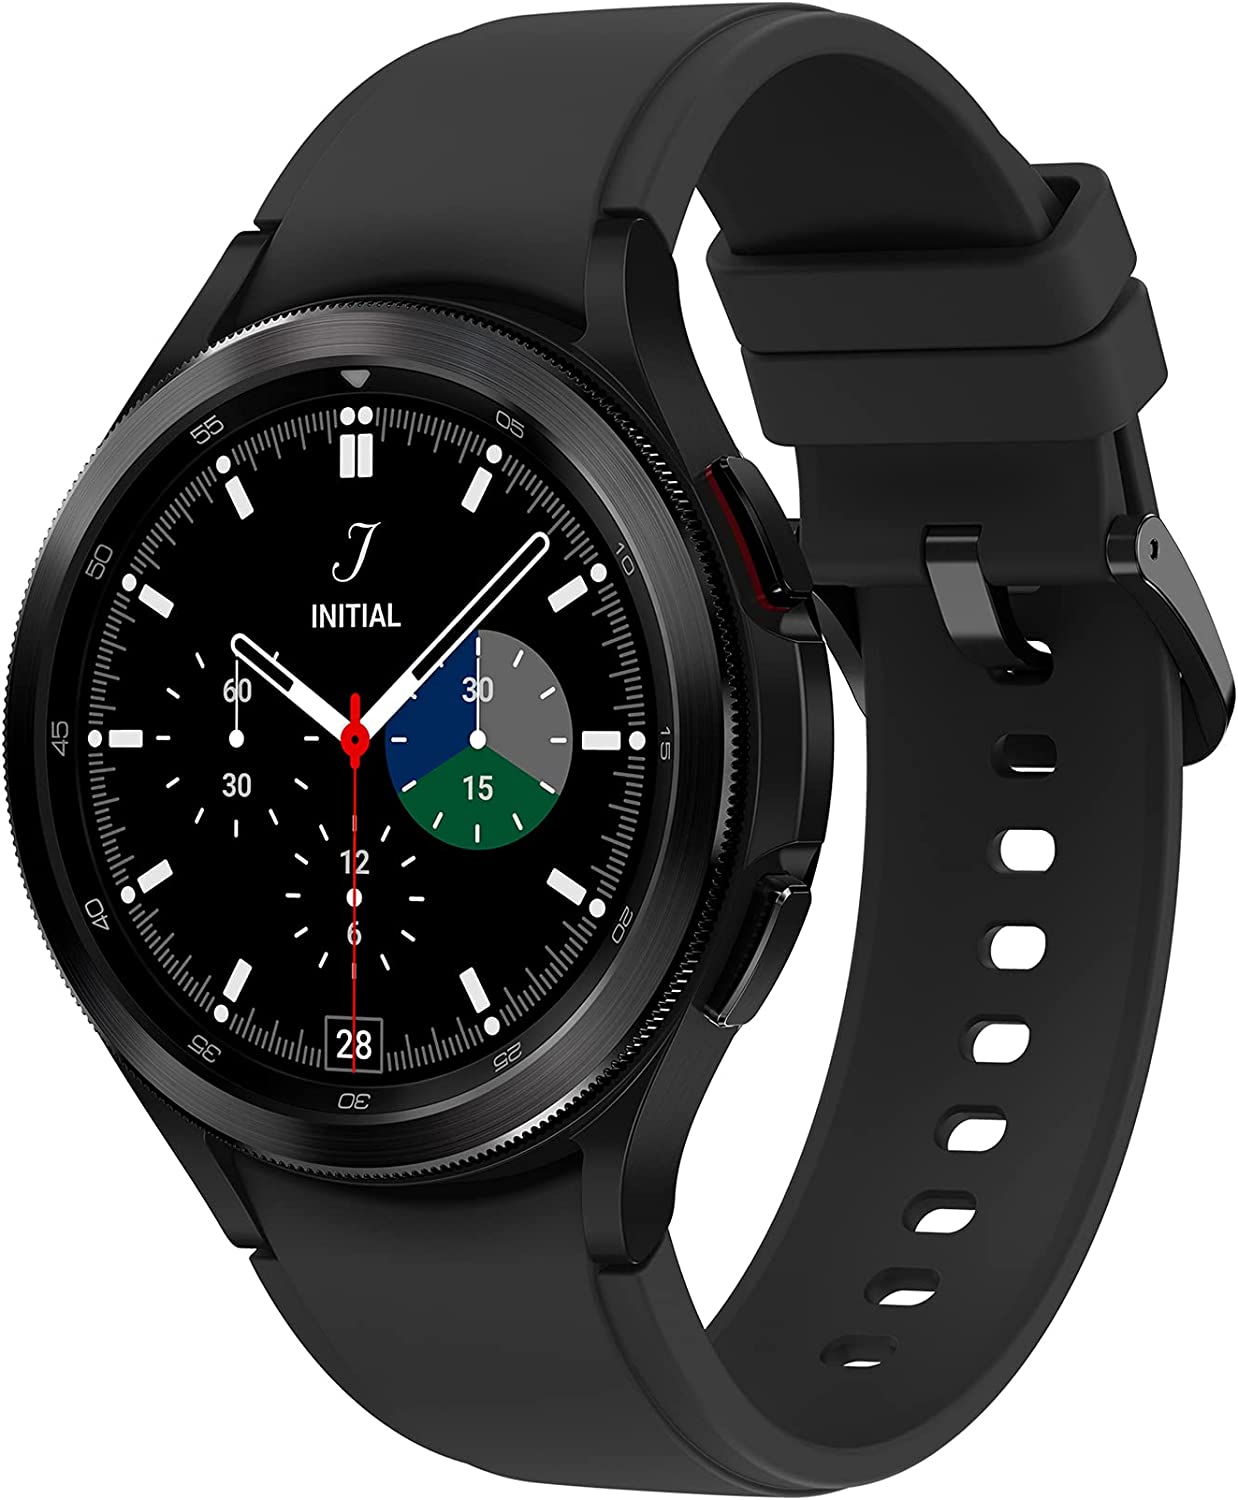 Samsung's smart watch is featured in the sale.